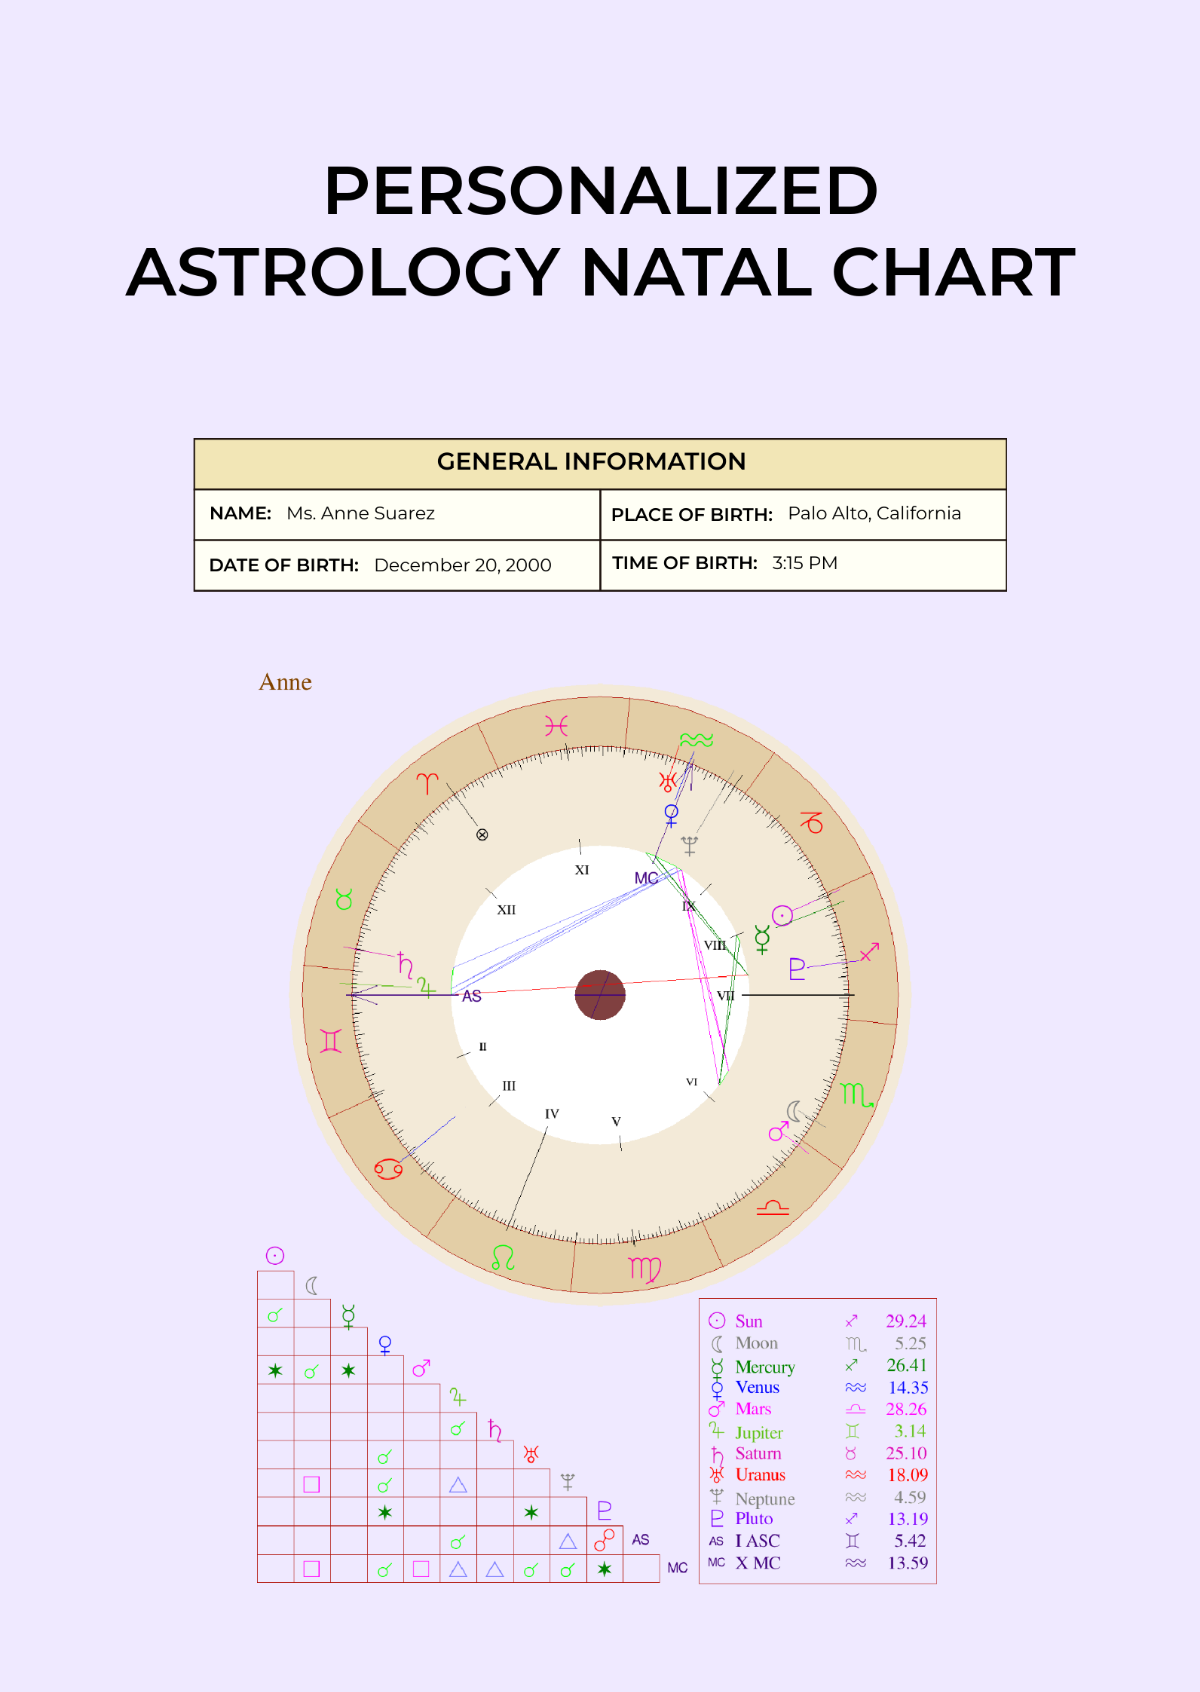 Personalized Astrology Natal Chart